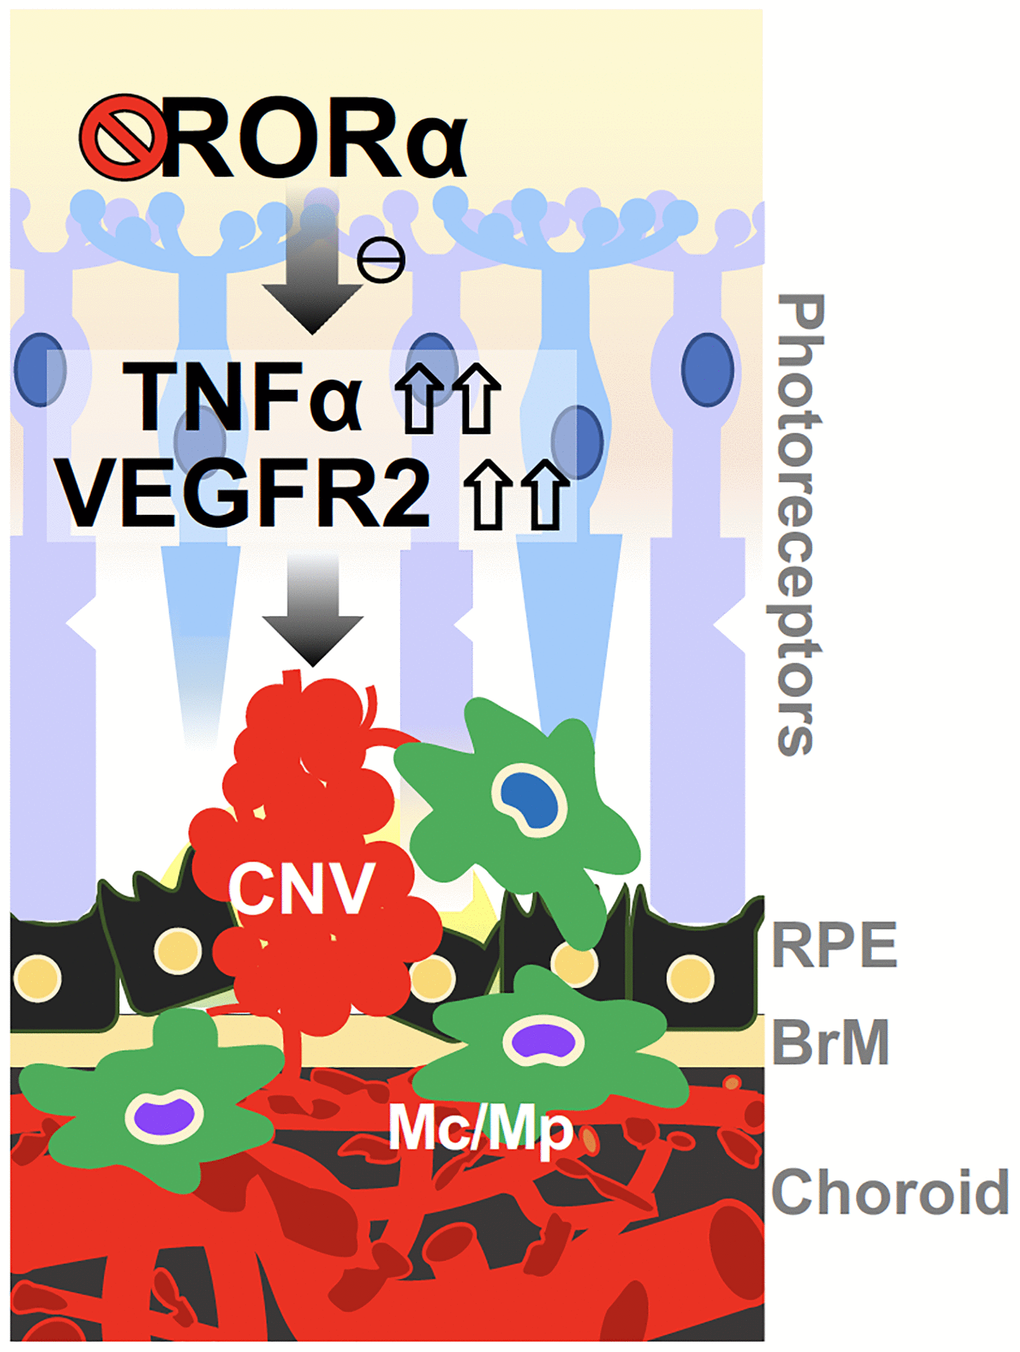 A schematic model for the effects of RORα on regulating CNV in wet AMD. Deficiency of RORα in choroid vessels directly induces expression of VEGF receptor VEGFR2, leading to enhanced choroidal endothelial angiogenic response and exacerbated pathological CNV formation. RORα deficiency may also influence CNV via increased TNFα, and chronic inflammation in the choroidal local environment, to potentially sensitize VEGF angiogenic response and thereby CNV formation. Abbreviations: BrM: Bruch’s membrane; CNV: choroidal neovascularization; Mc: microglial cell; Mp: macrophage; RPE: retinal pigment epithelium.